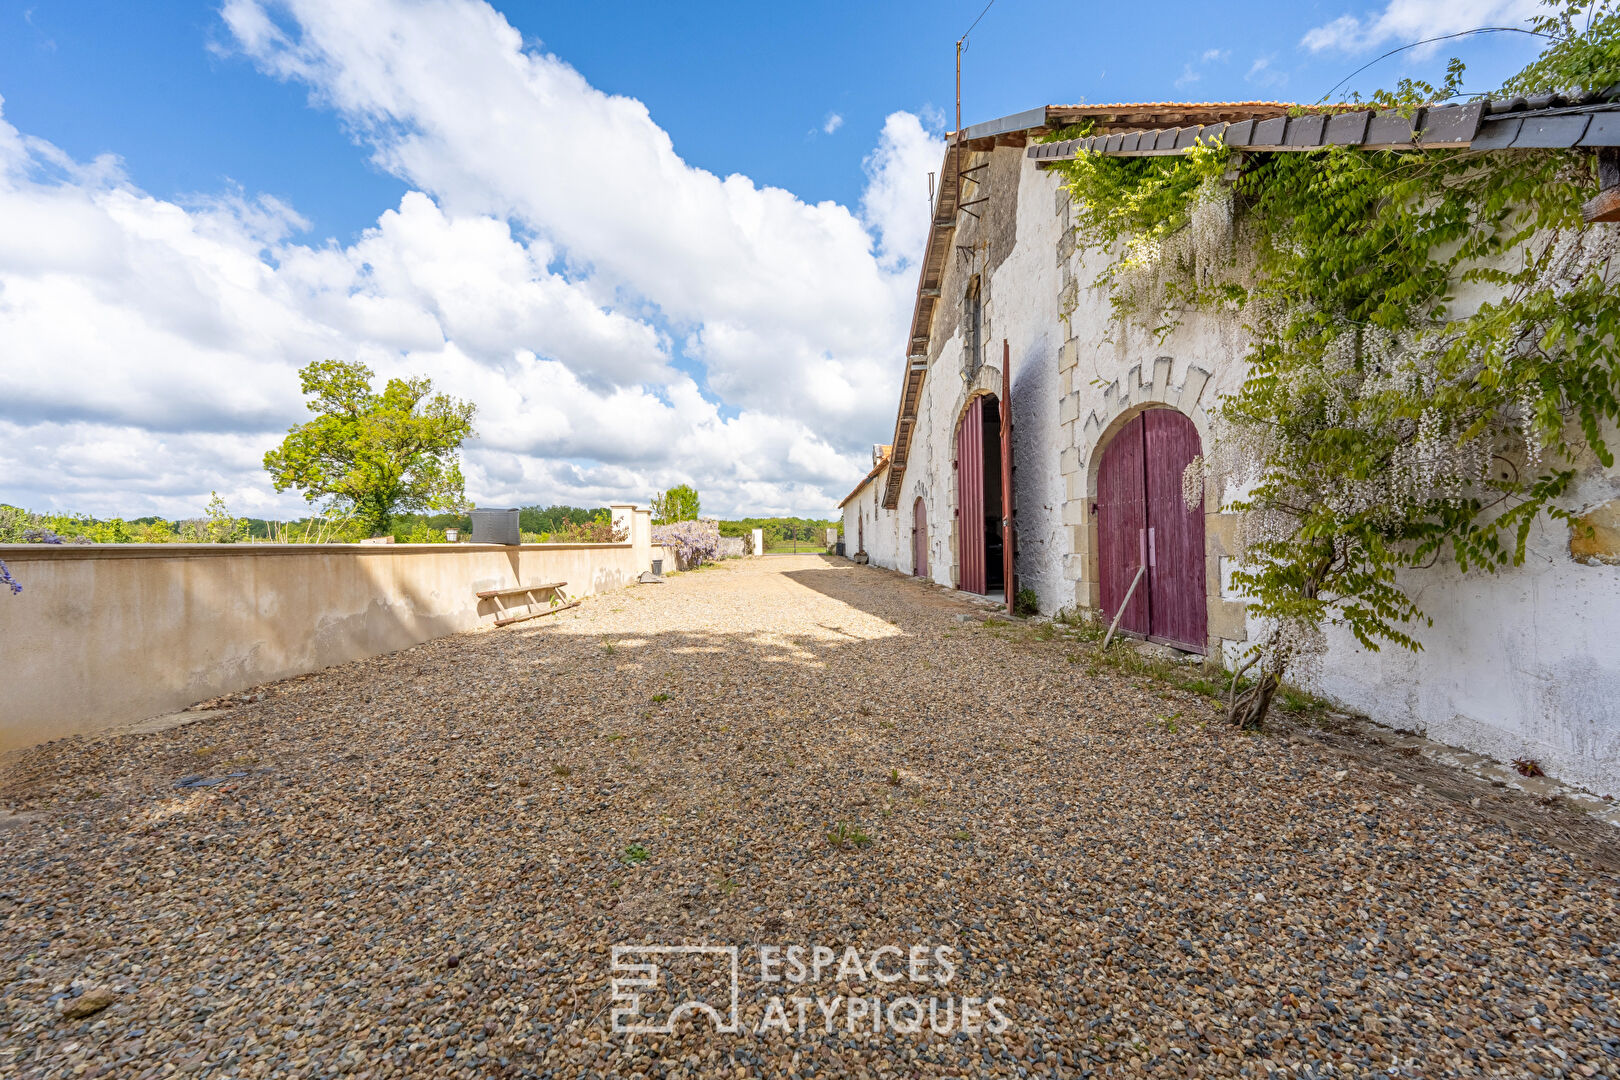 16th century property with privileged view of the Loire